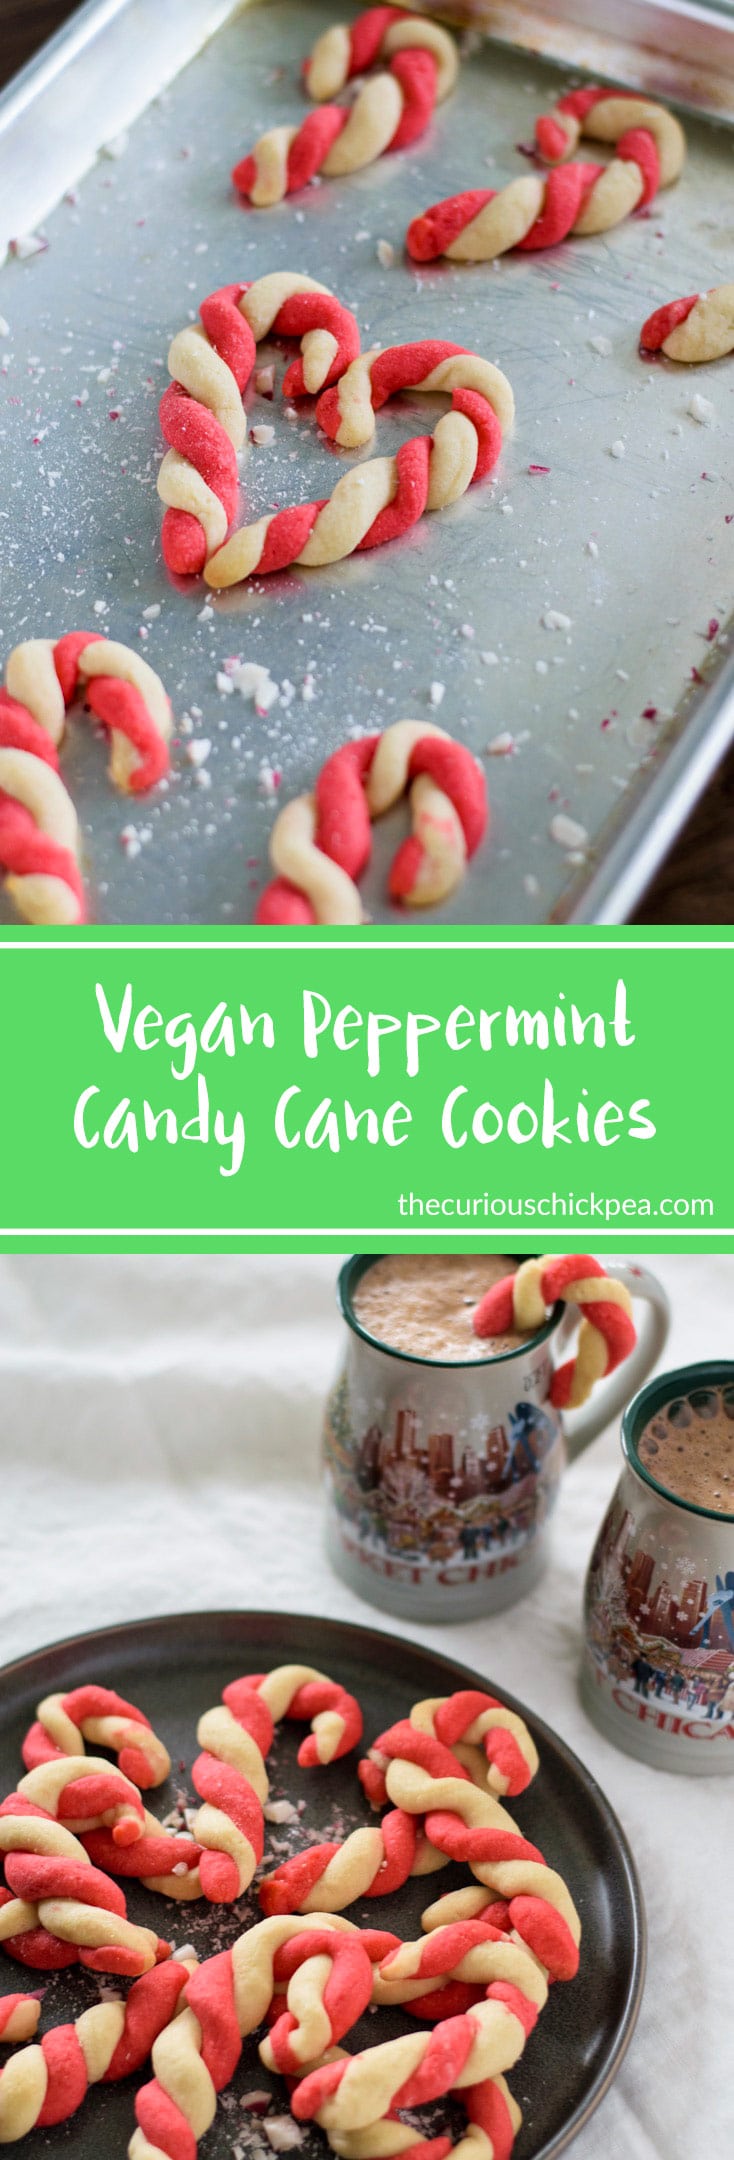 Vegan Peppermint Candy Cane Cookies | These subtly minty vegan cookies are shaped to look like candy canes, & are the perfect balance of tender, chewy, and crisp. The perfect holiday cookie! | thecuriouschickpea.com #vegan #cookies